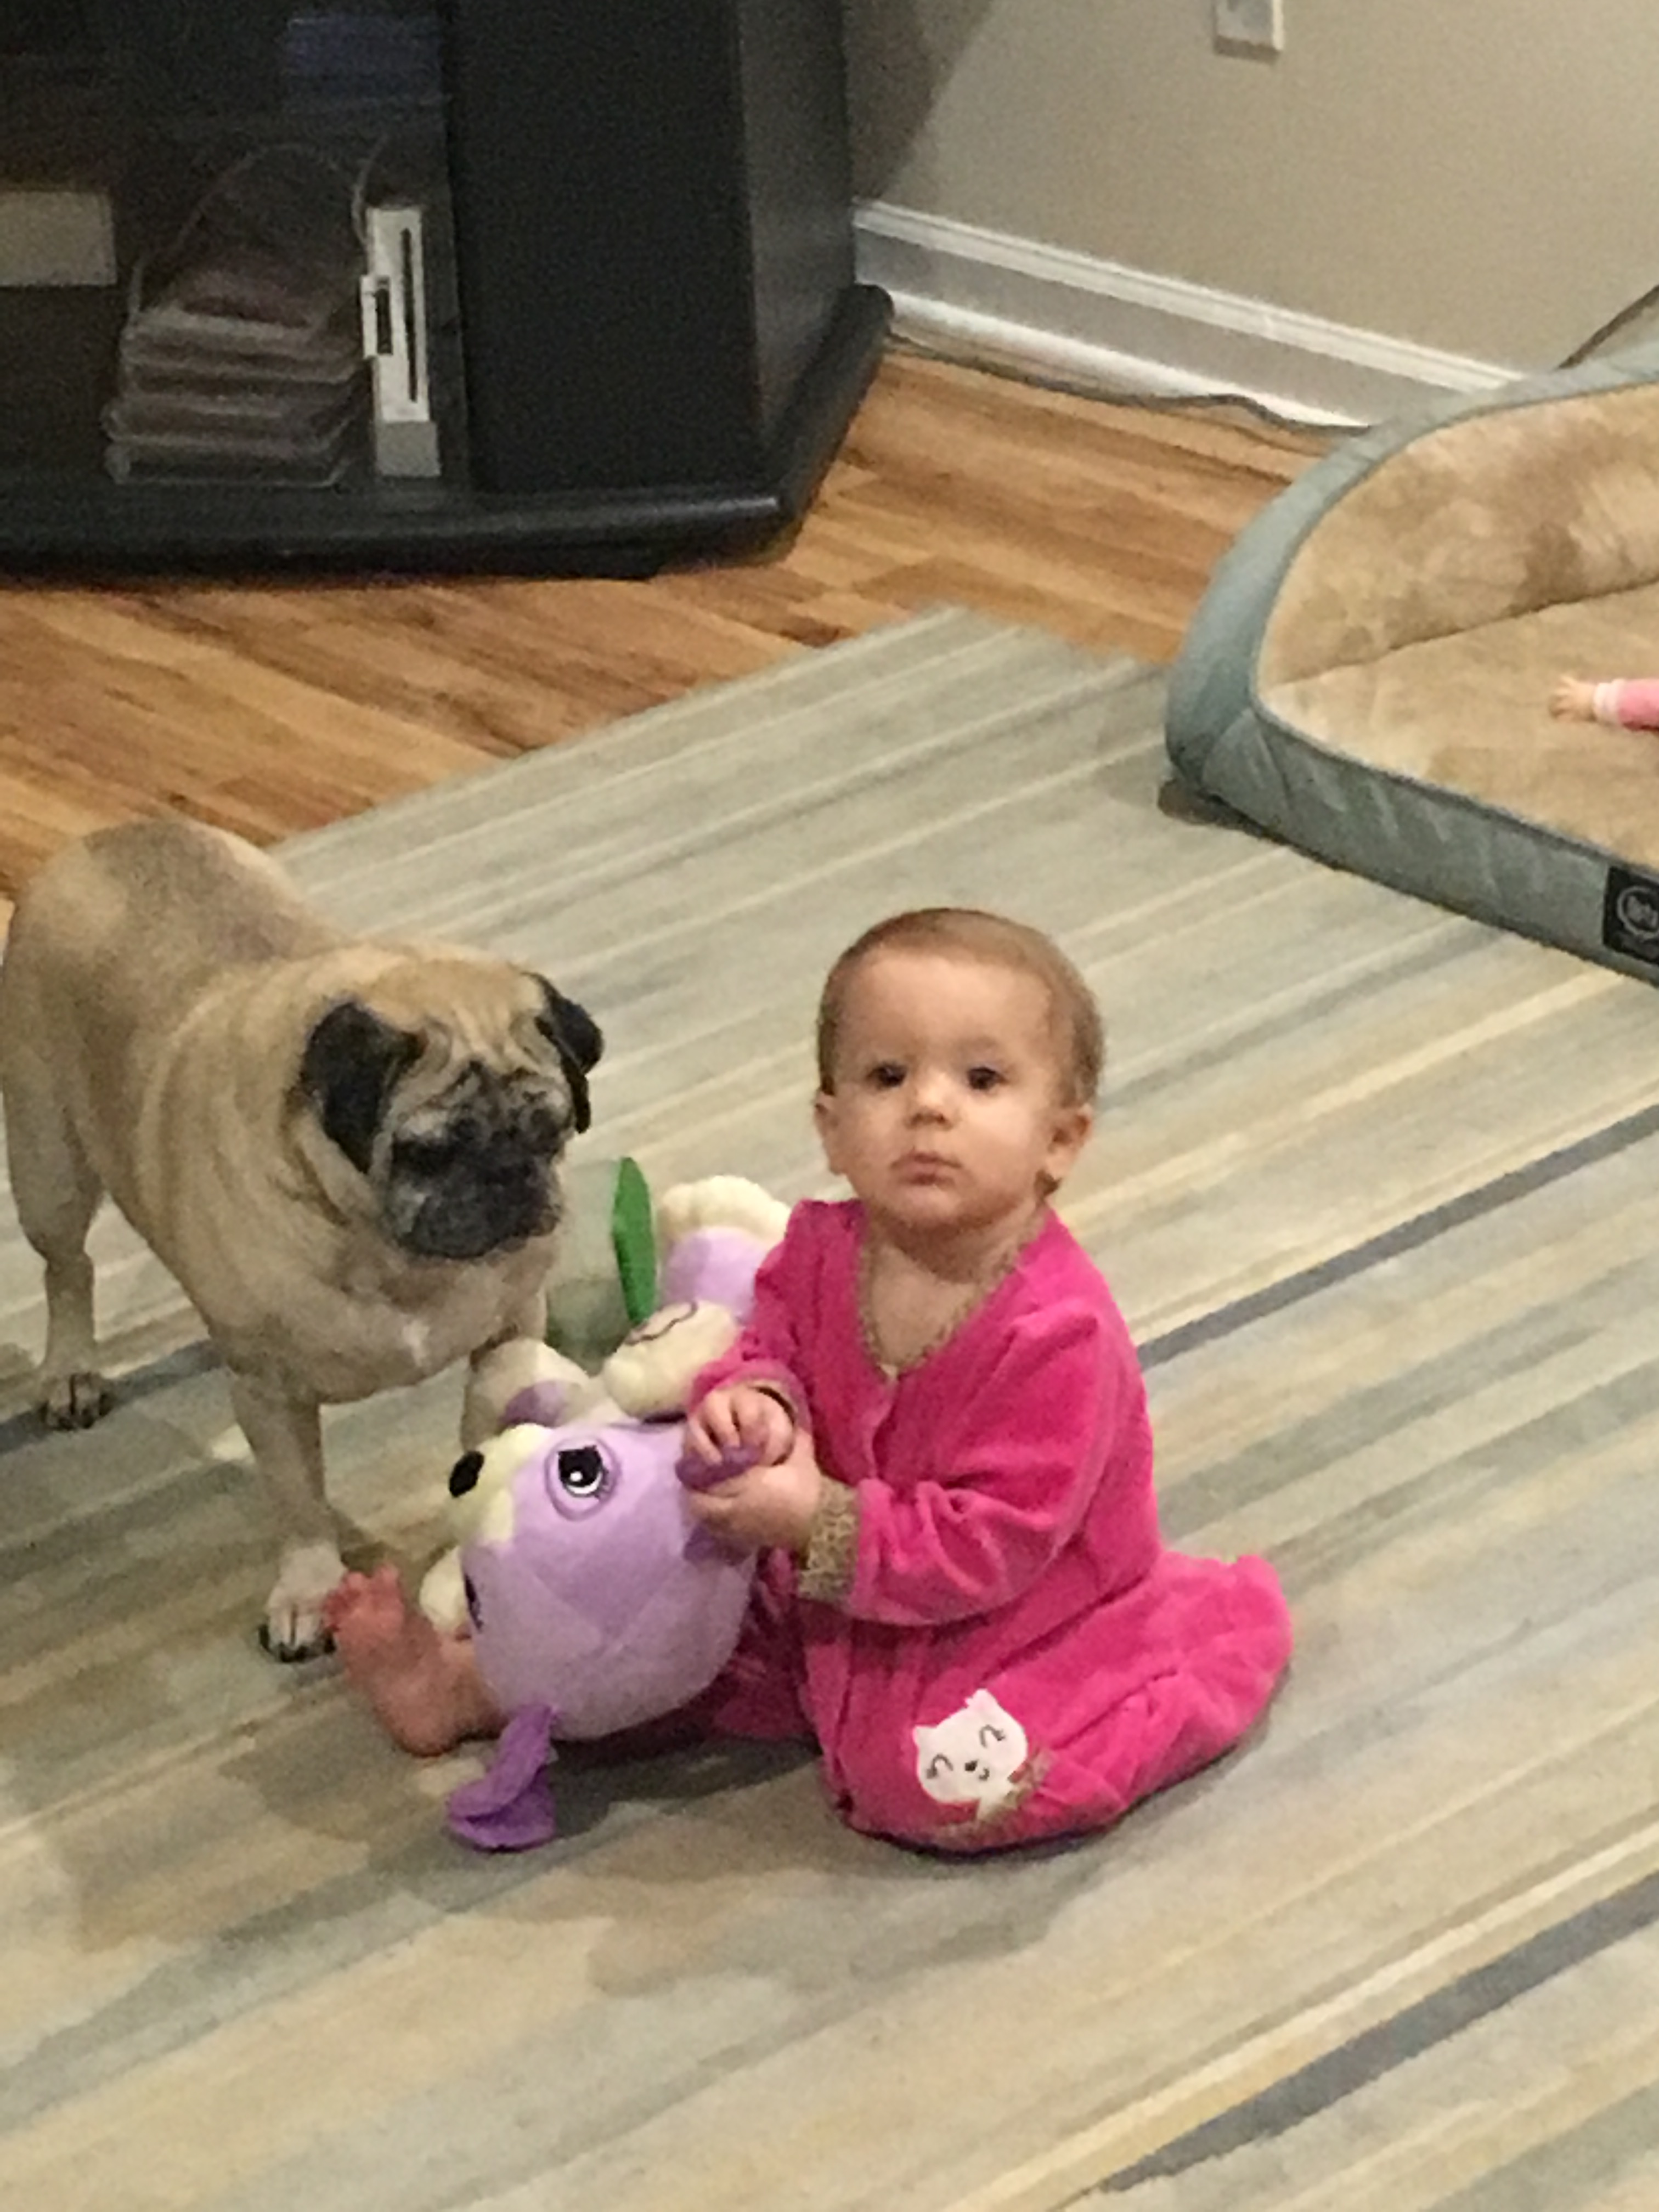 Brad's daughter with the family dog.